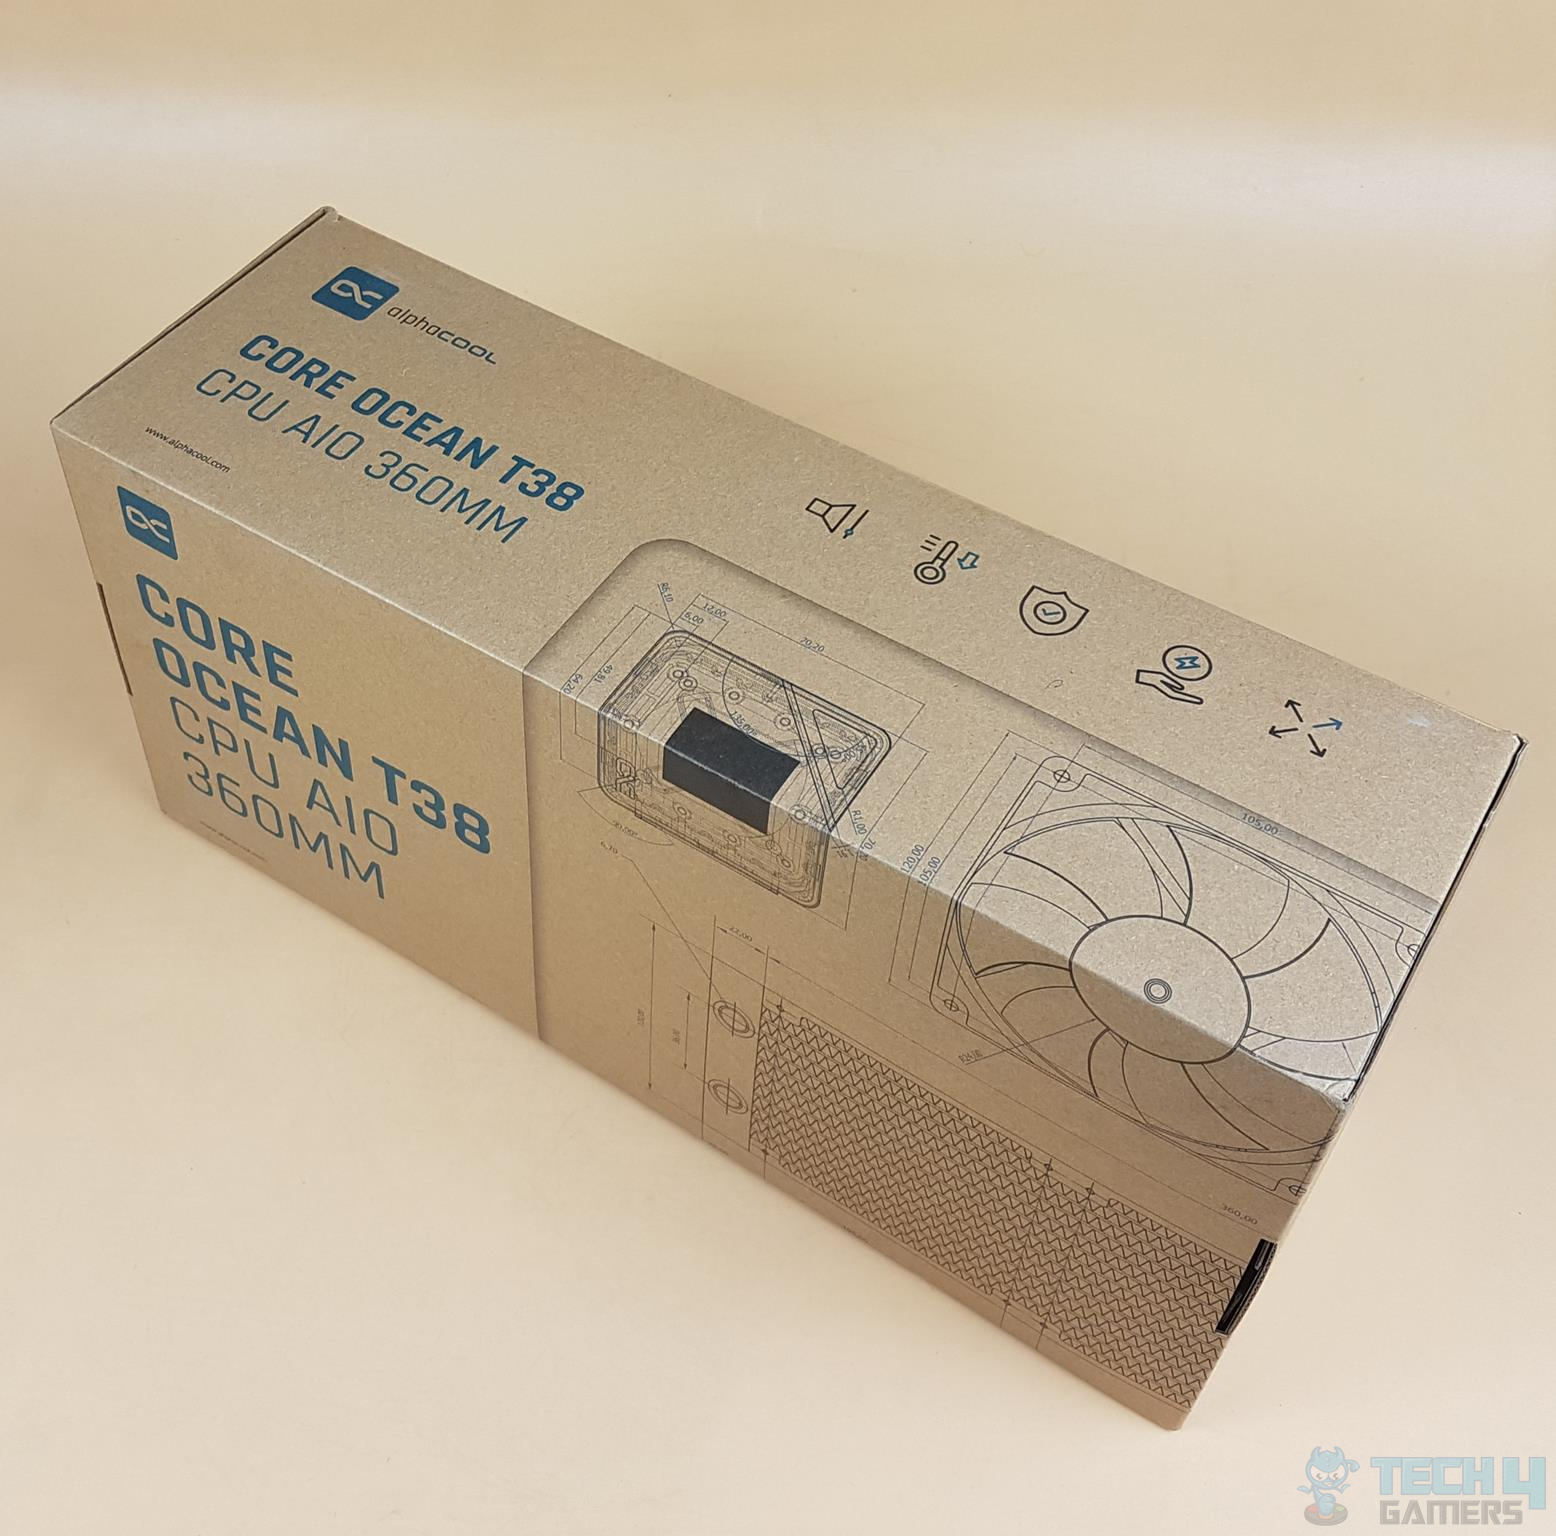 ALPHACOOL CORE OCEAN T38 AIO 360mm — Another look at the packaging